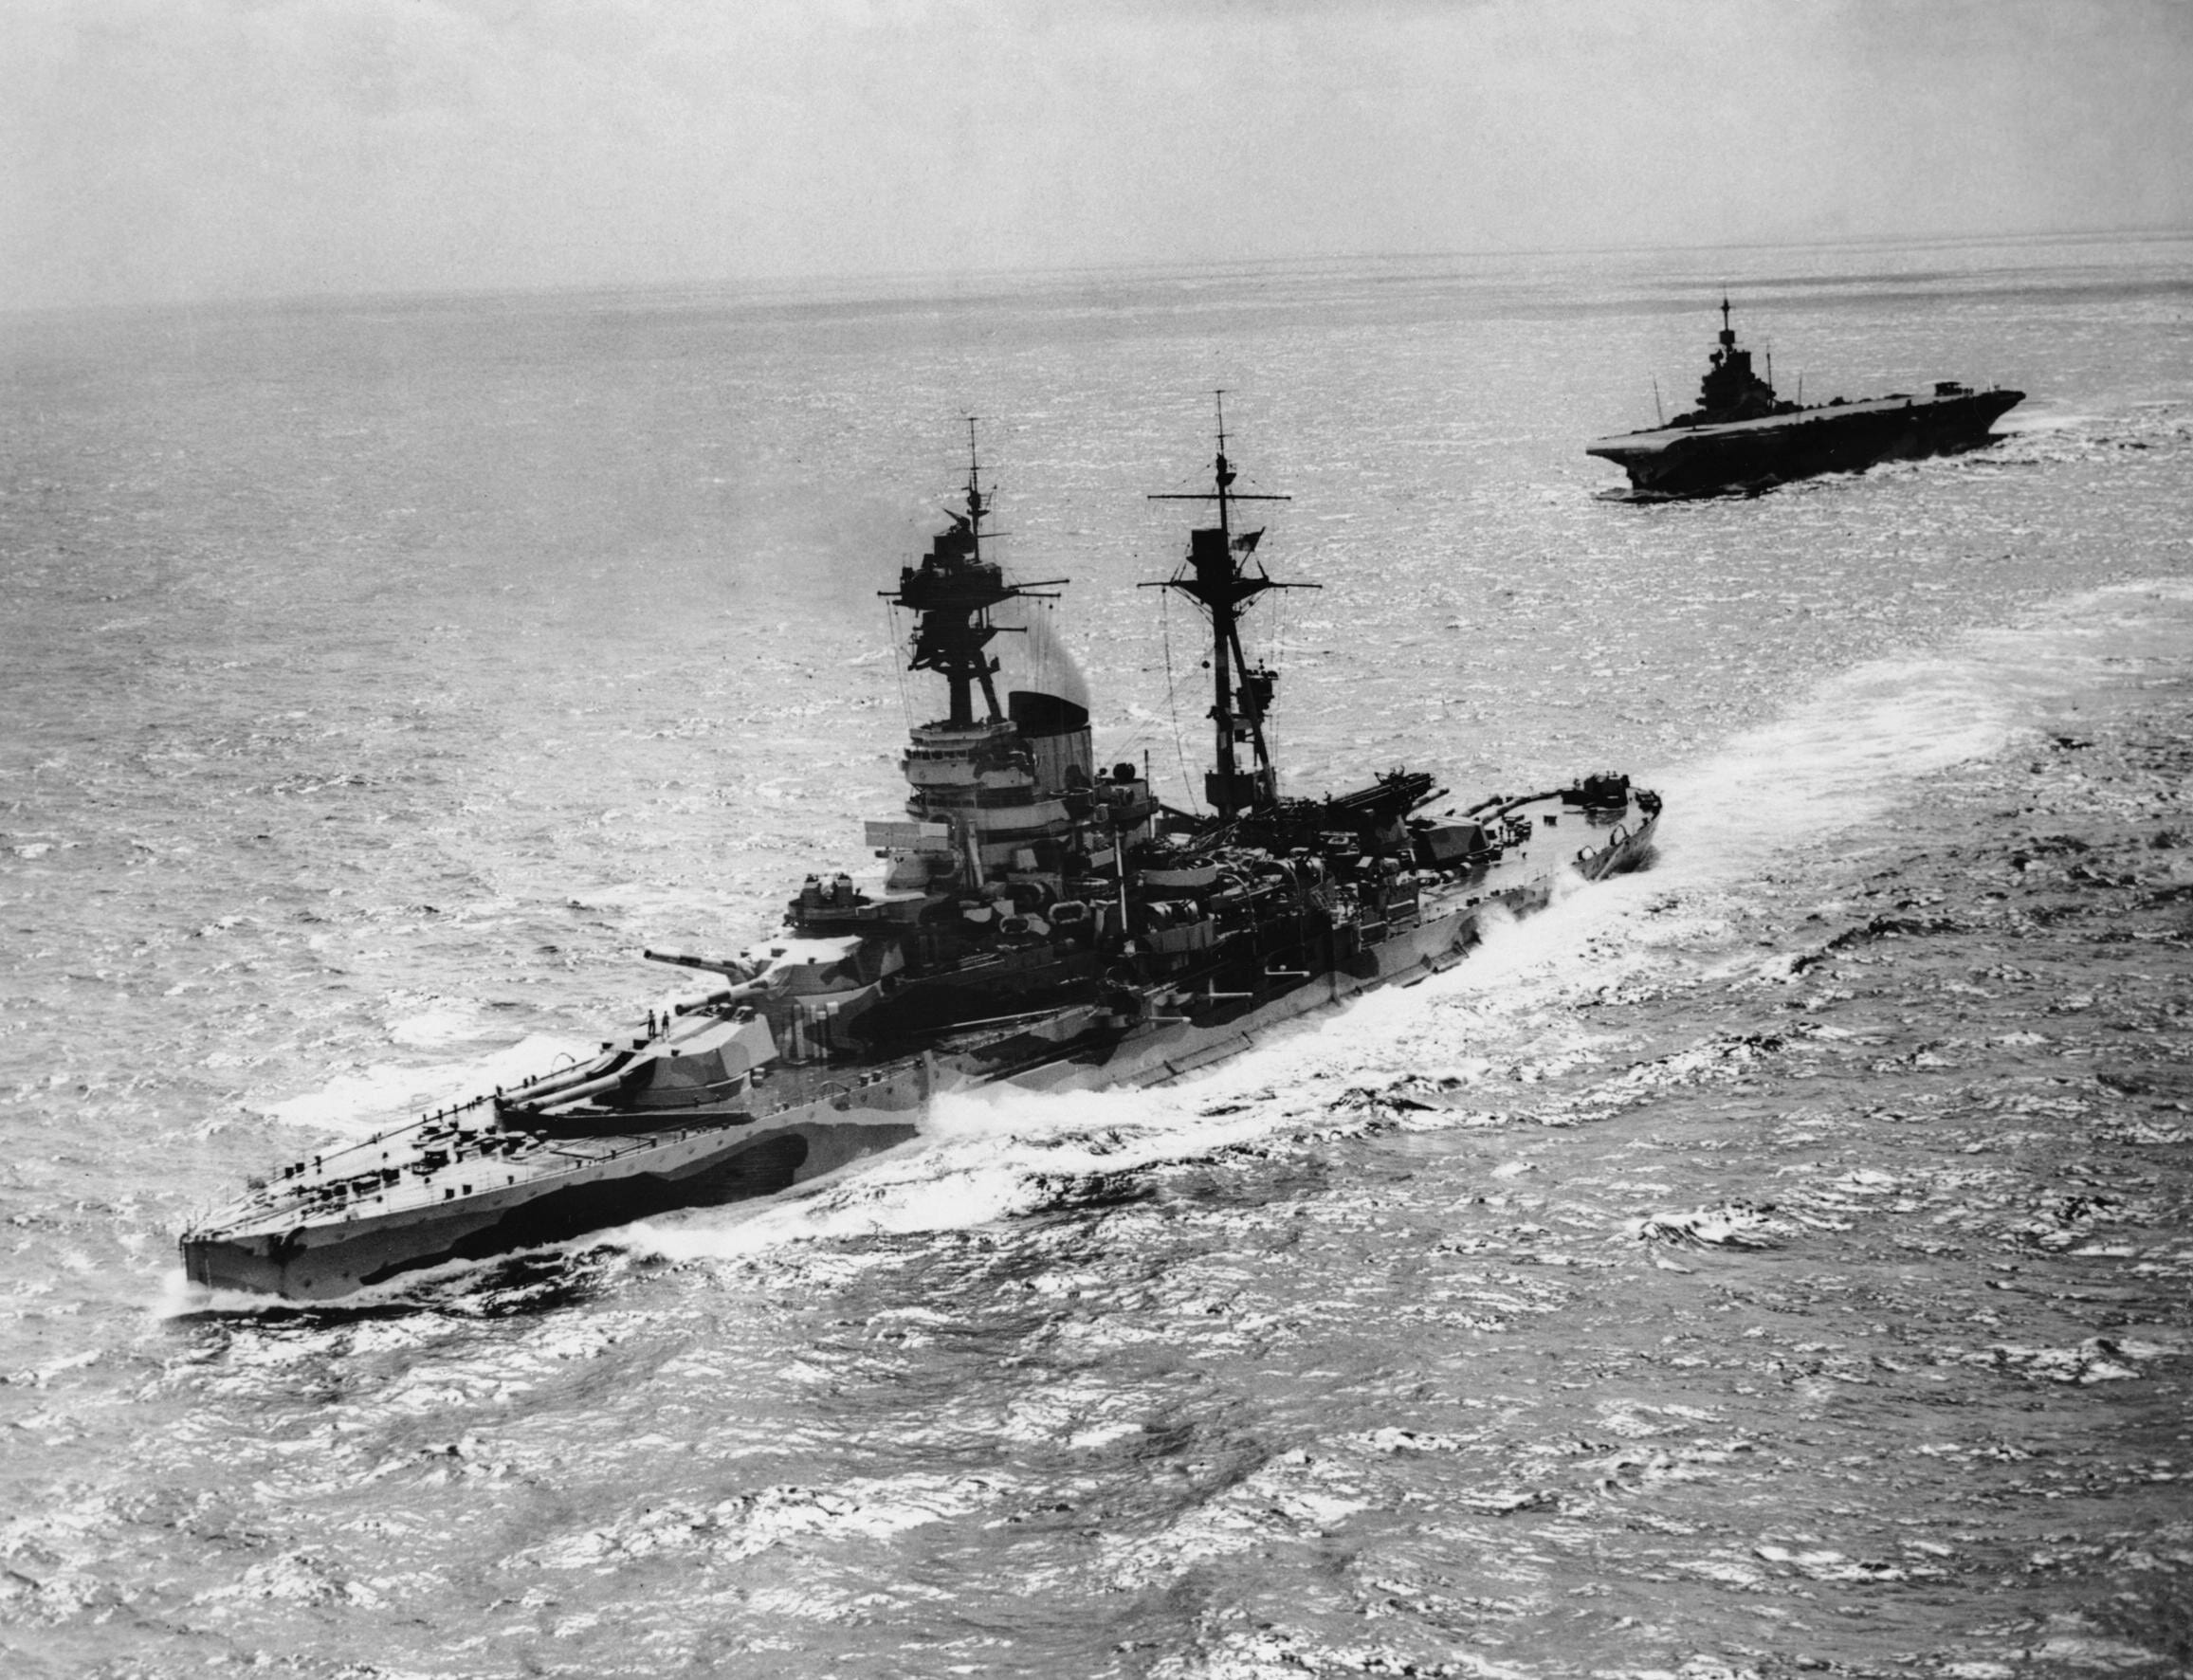 Naval ships in convoy - a destroyer and aircraft carrier